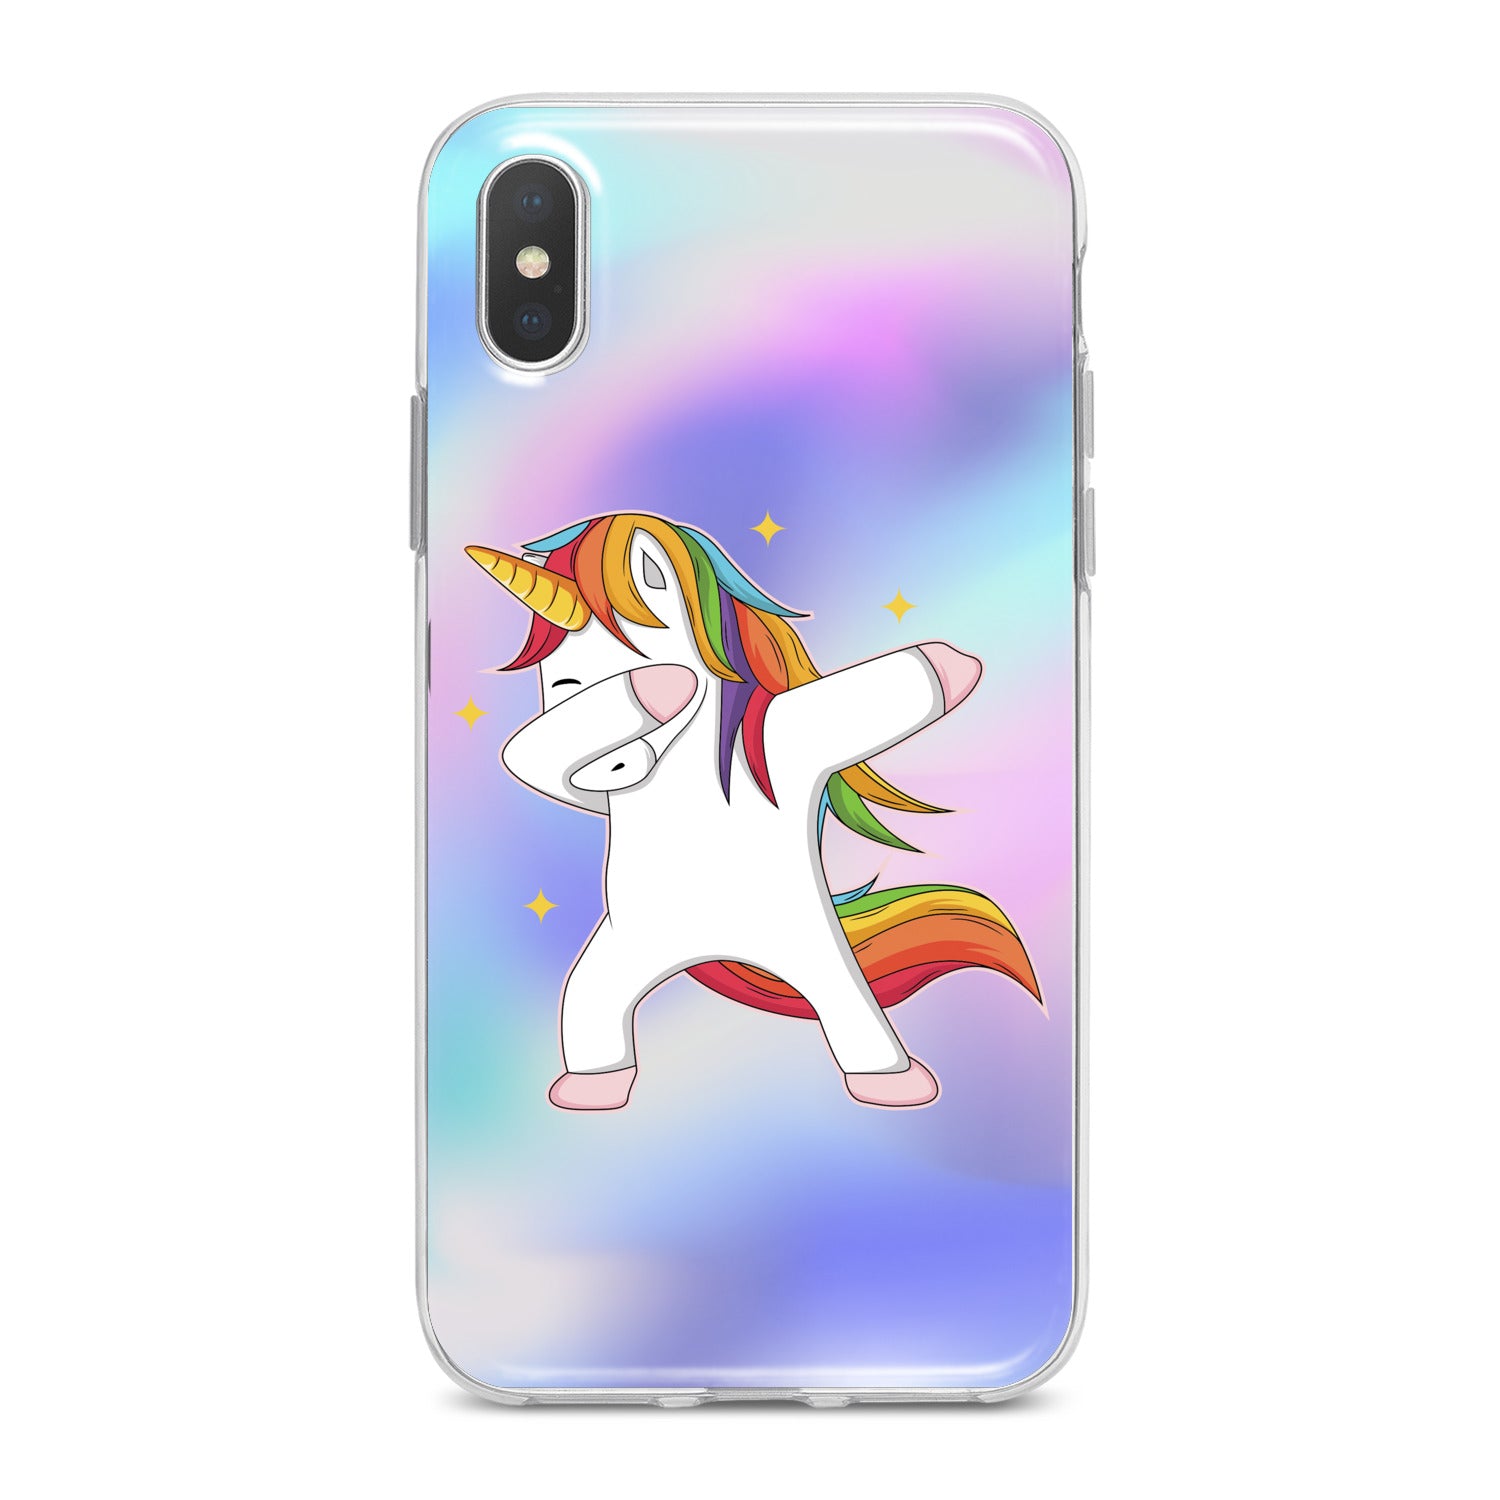 Lex Altern Rainbow Unicorn Phone Case for your iPhone & Android phone.